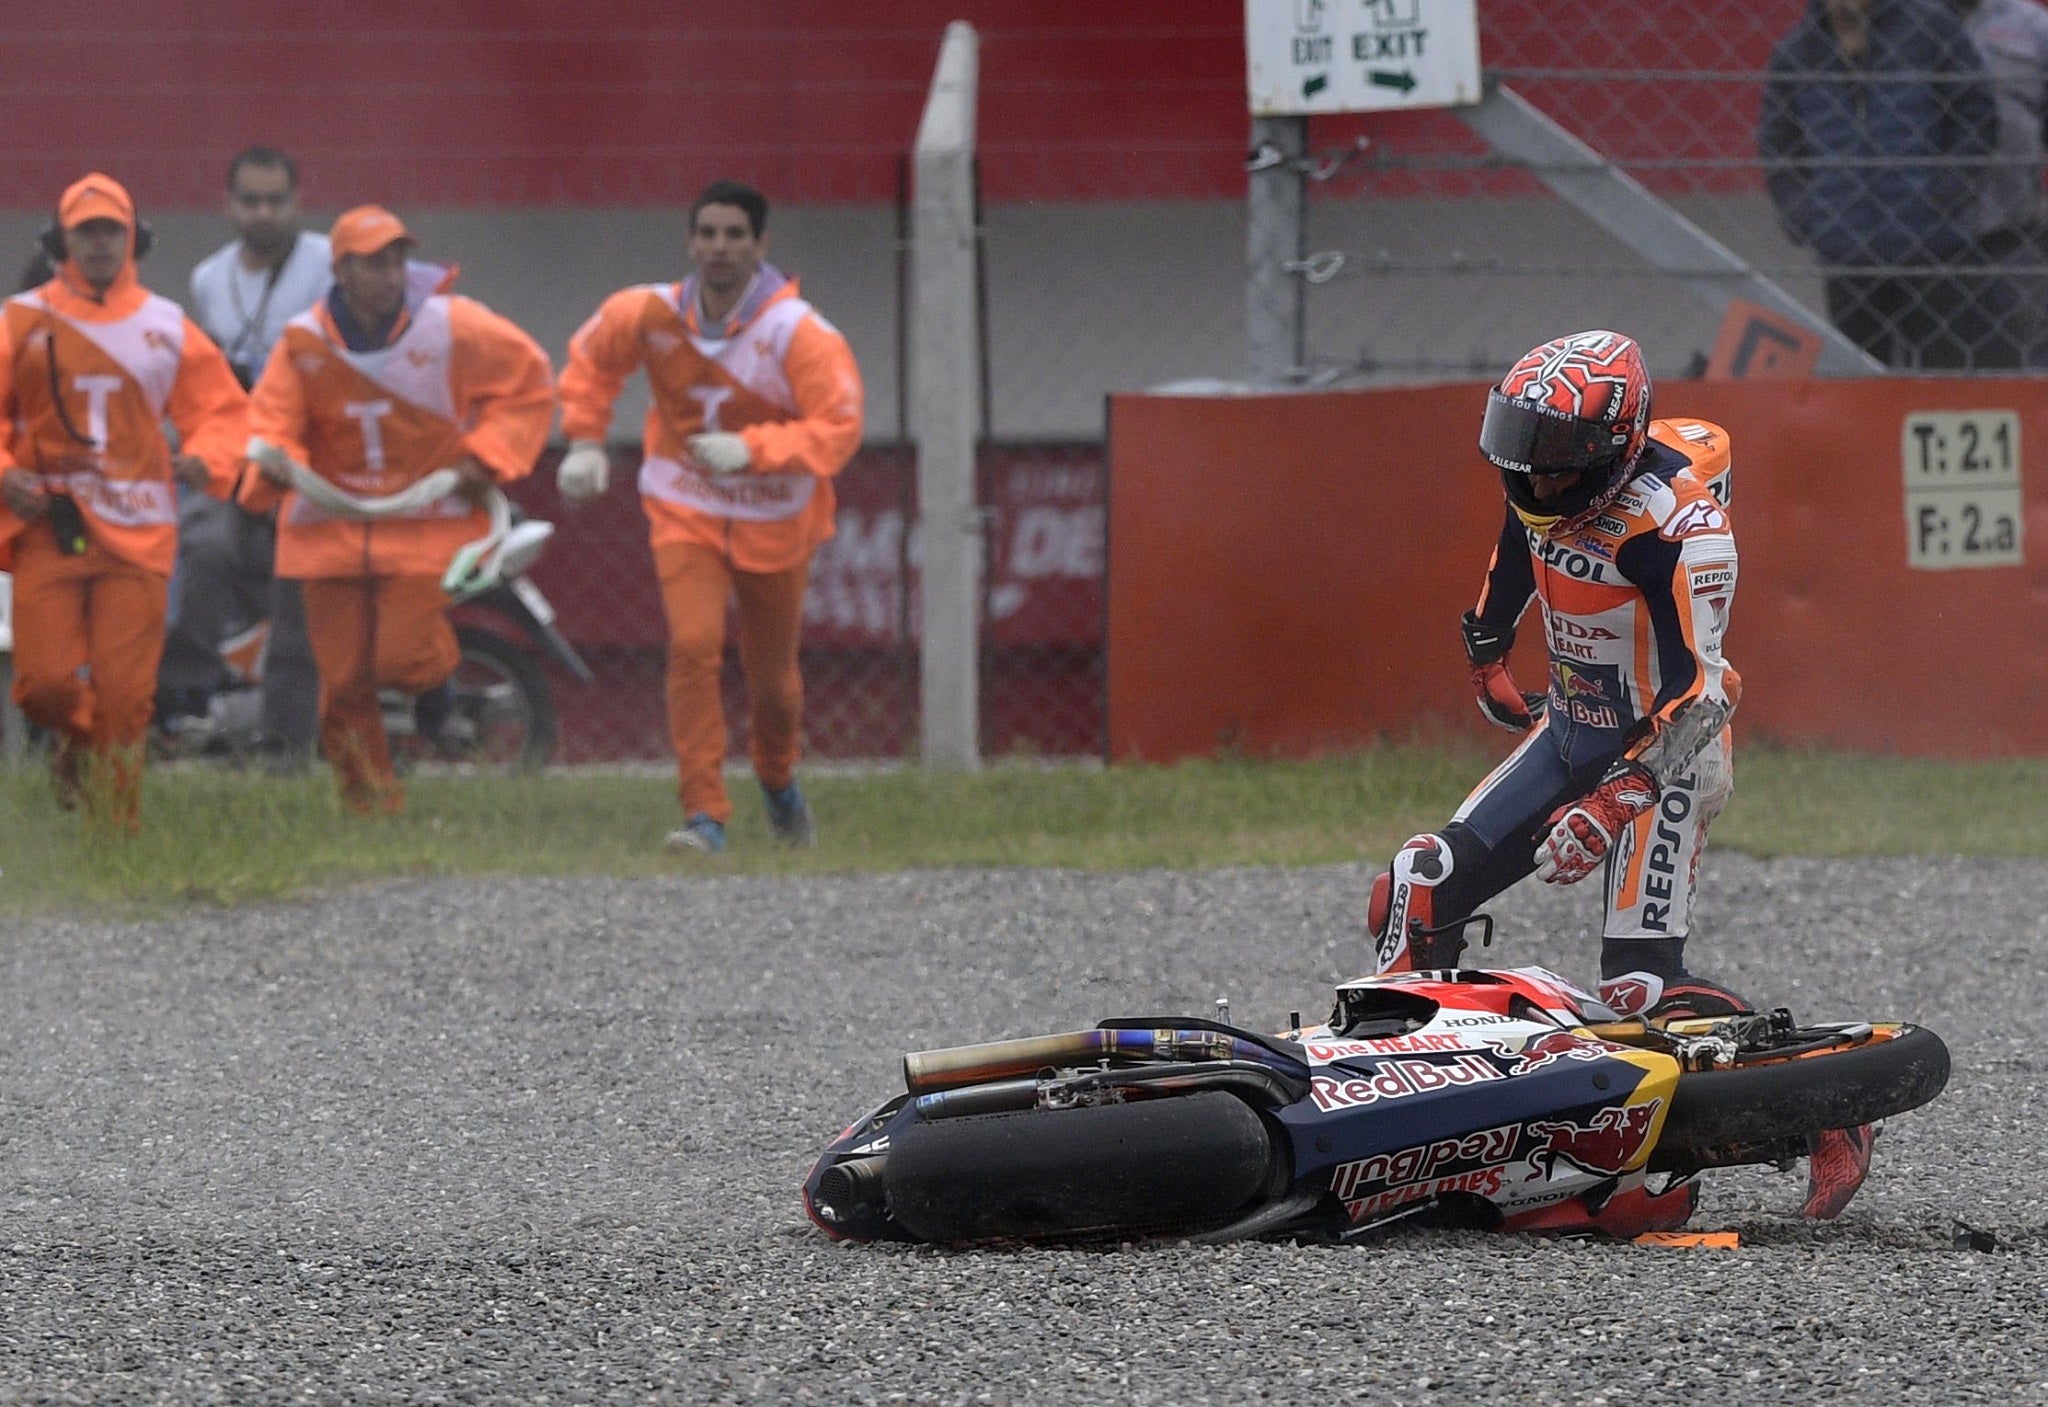 Marc Marquez crashed out of the lead on the fourth lap